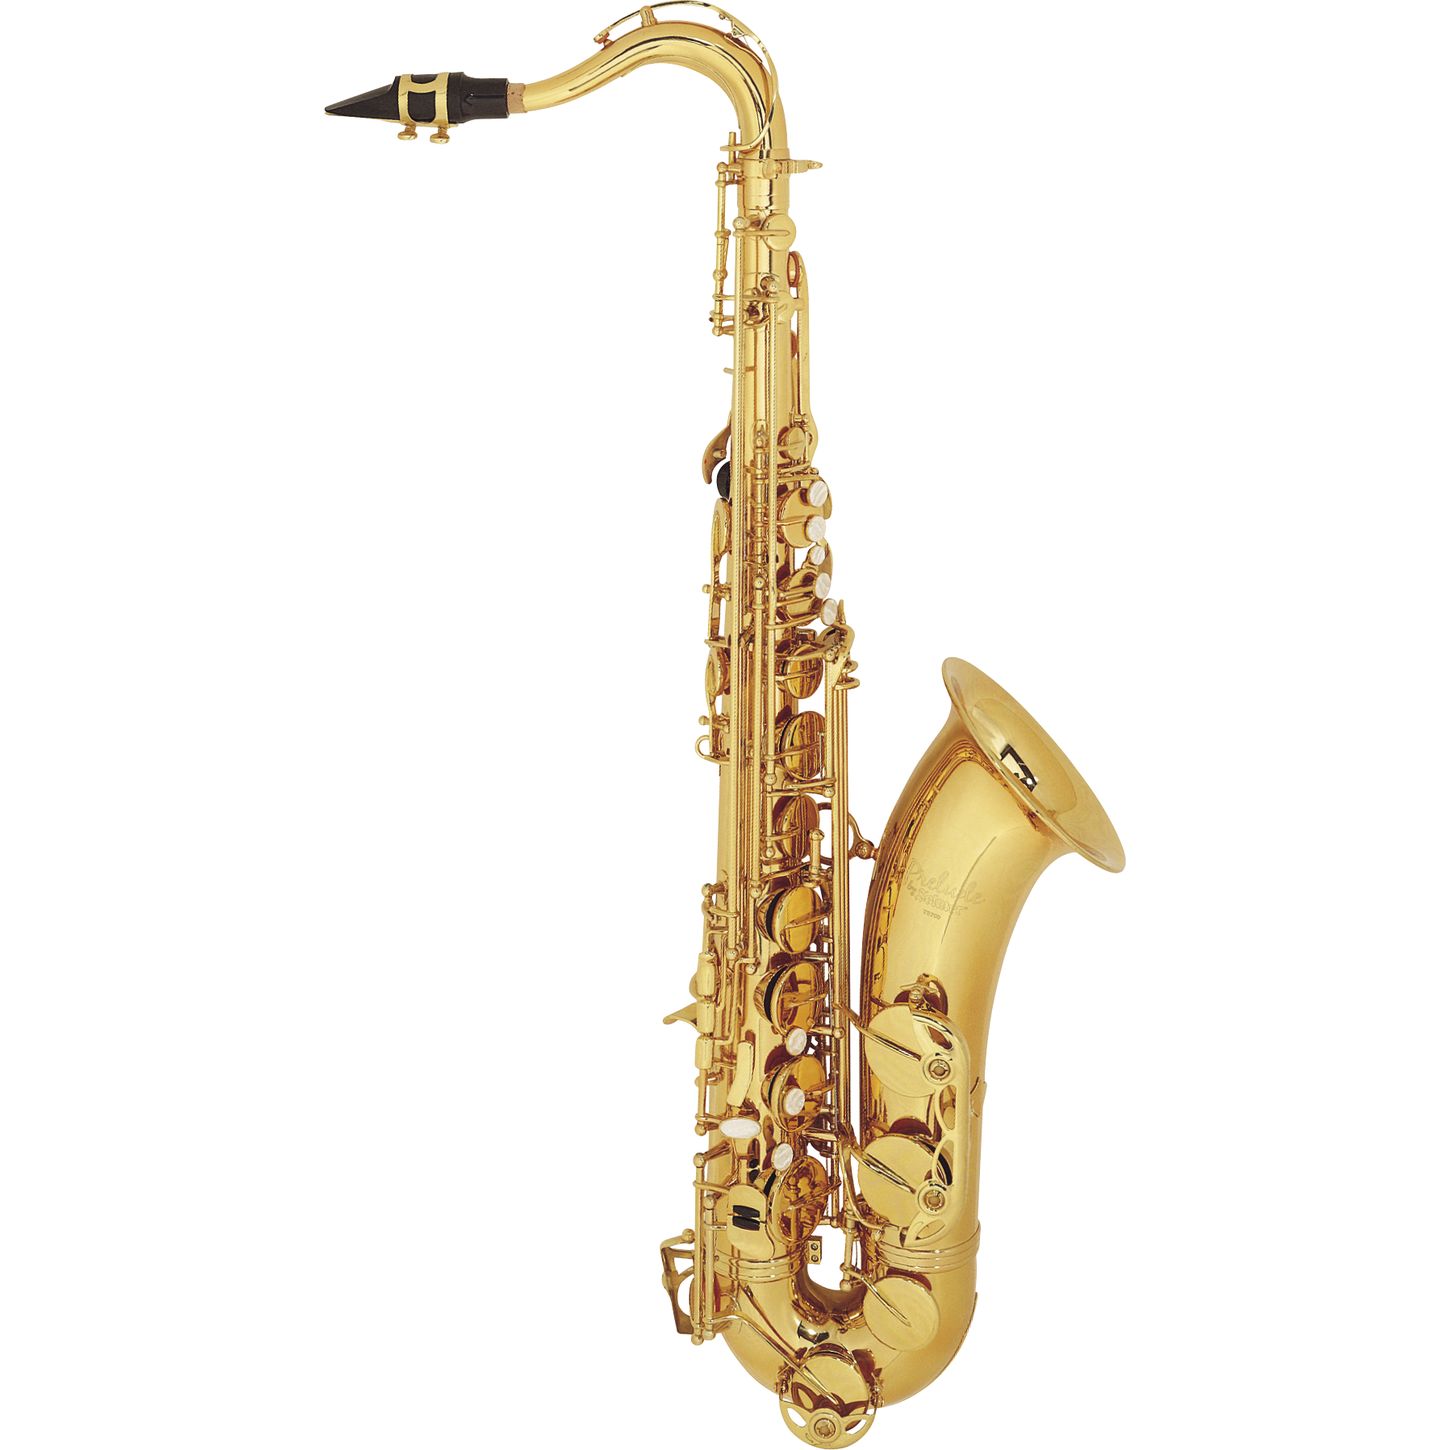 Prelude By Connselmer Student Tenor Saxophone Musician S Friend